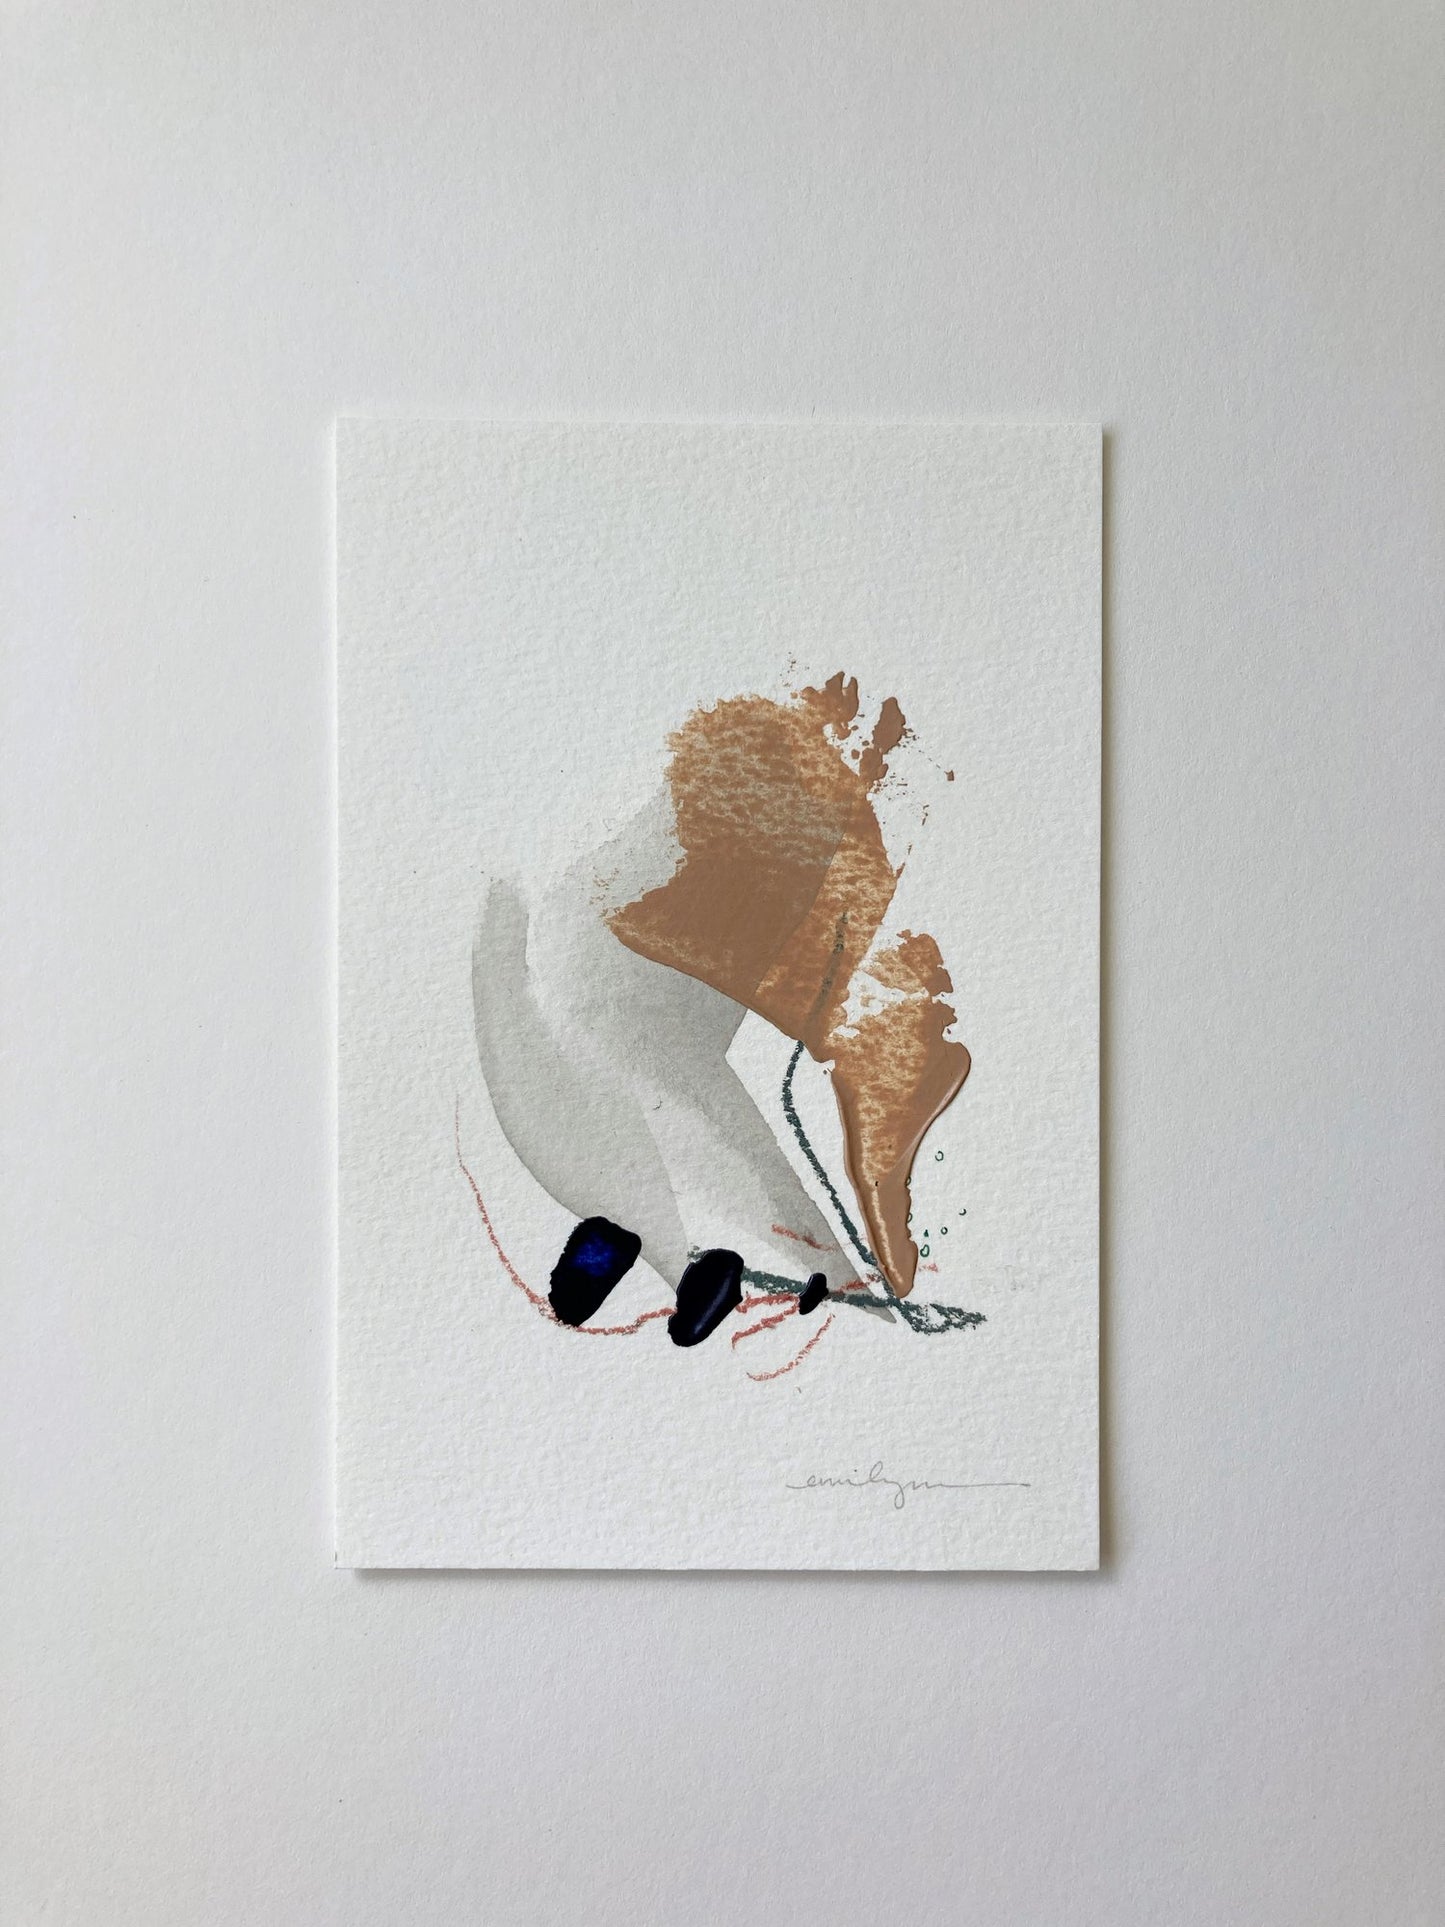 Minimalist neutral coloured artwork pictured on the wall